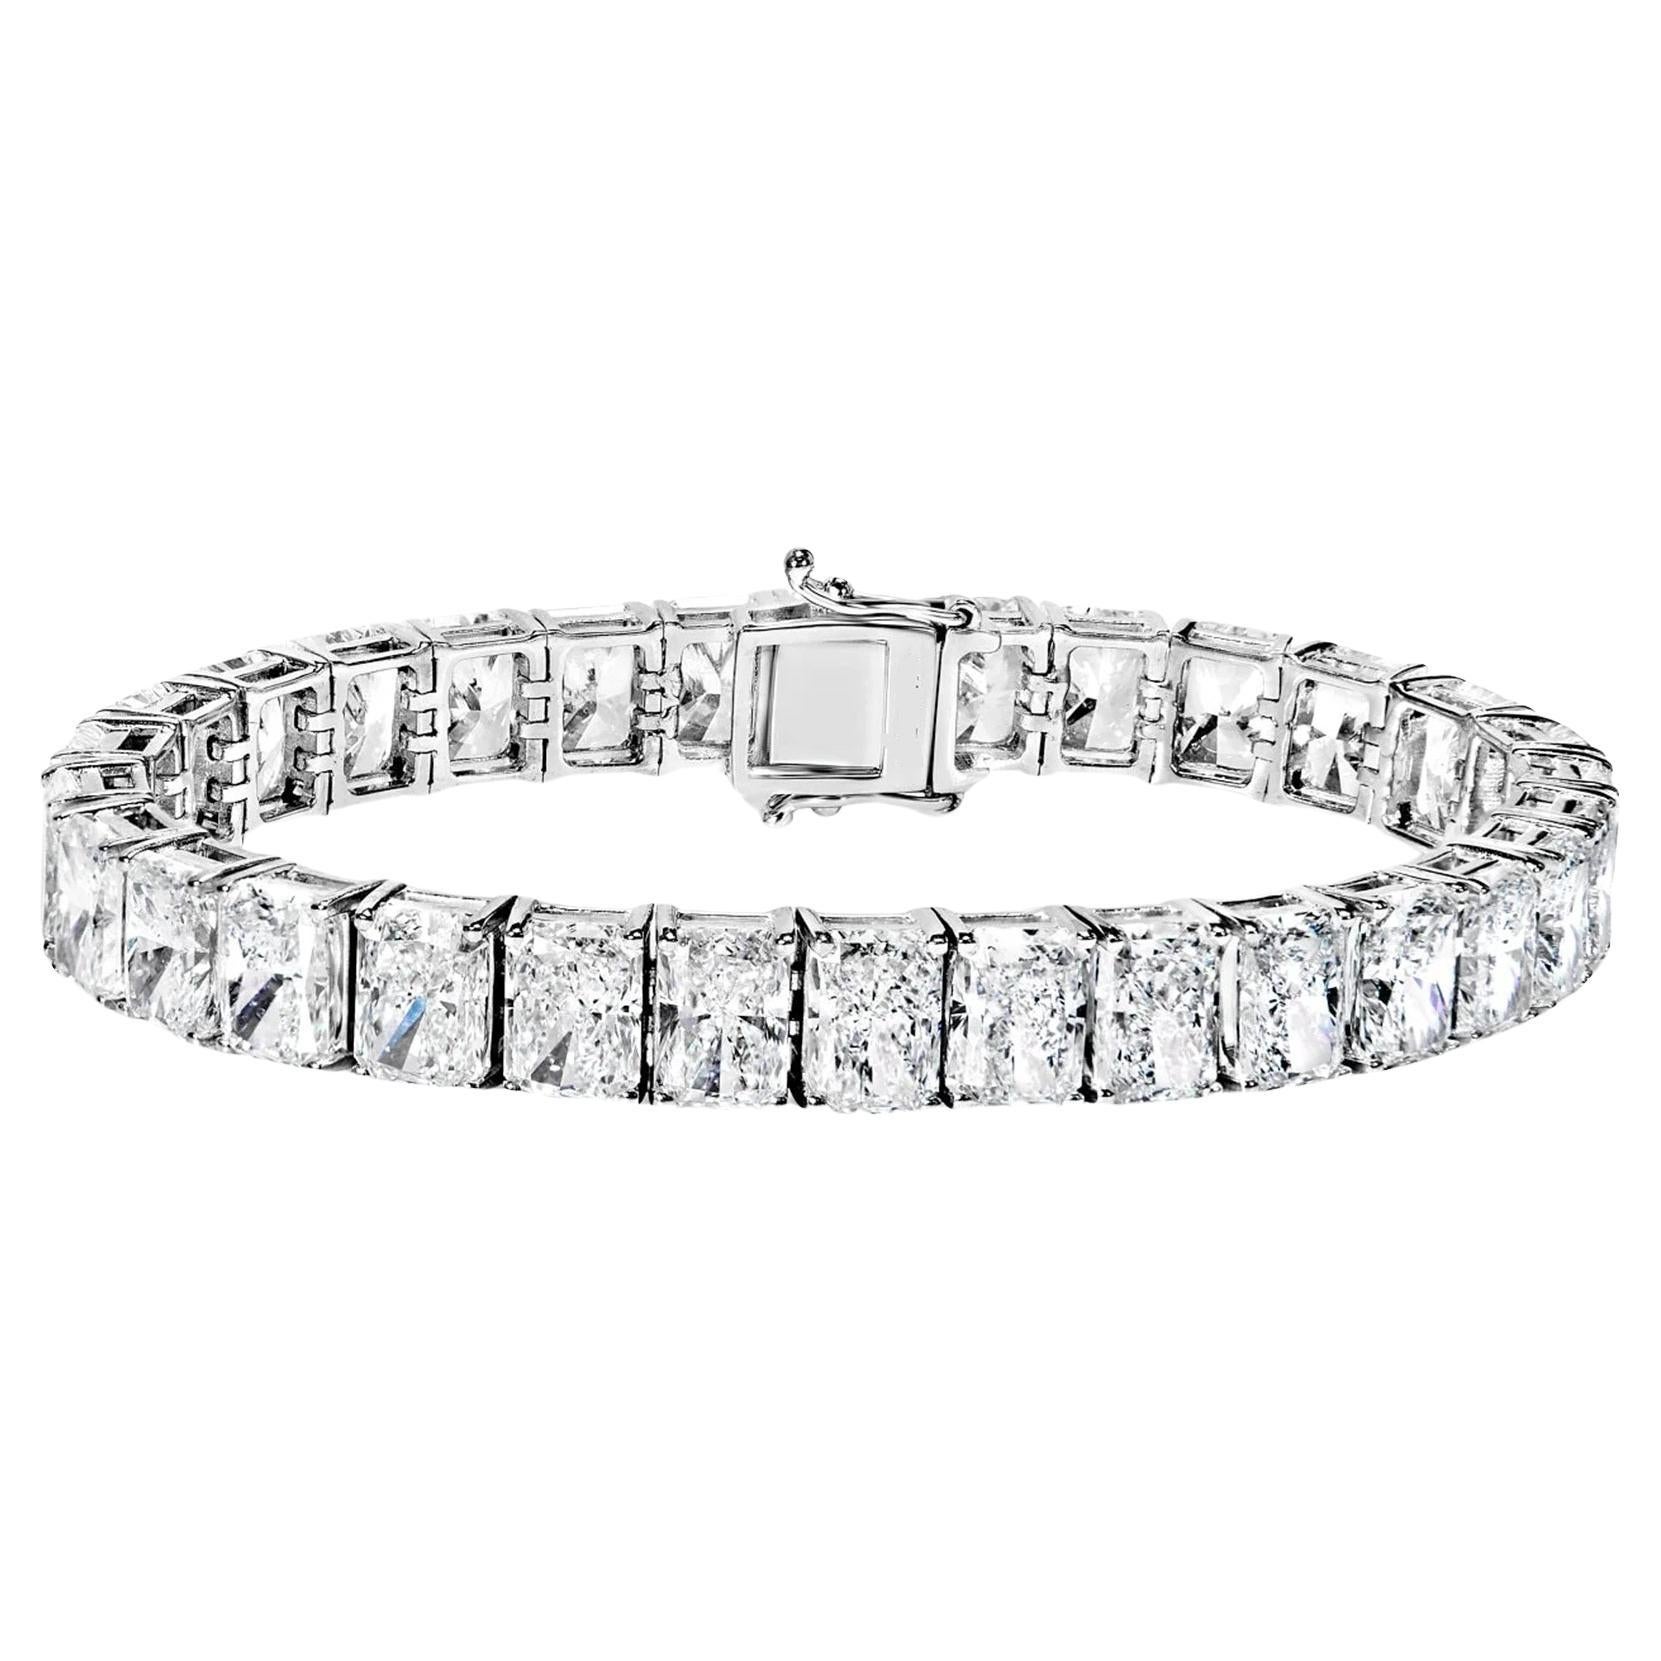 This elegant tennis bracelet is designed with exquisite craftsmanship, crafted from lustrous platinum to ensure durability and timeless elegance. Adorning the bracelet are a total of 30 stunning radiant-cut diamonds, each meticulously set within a